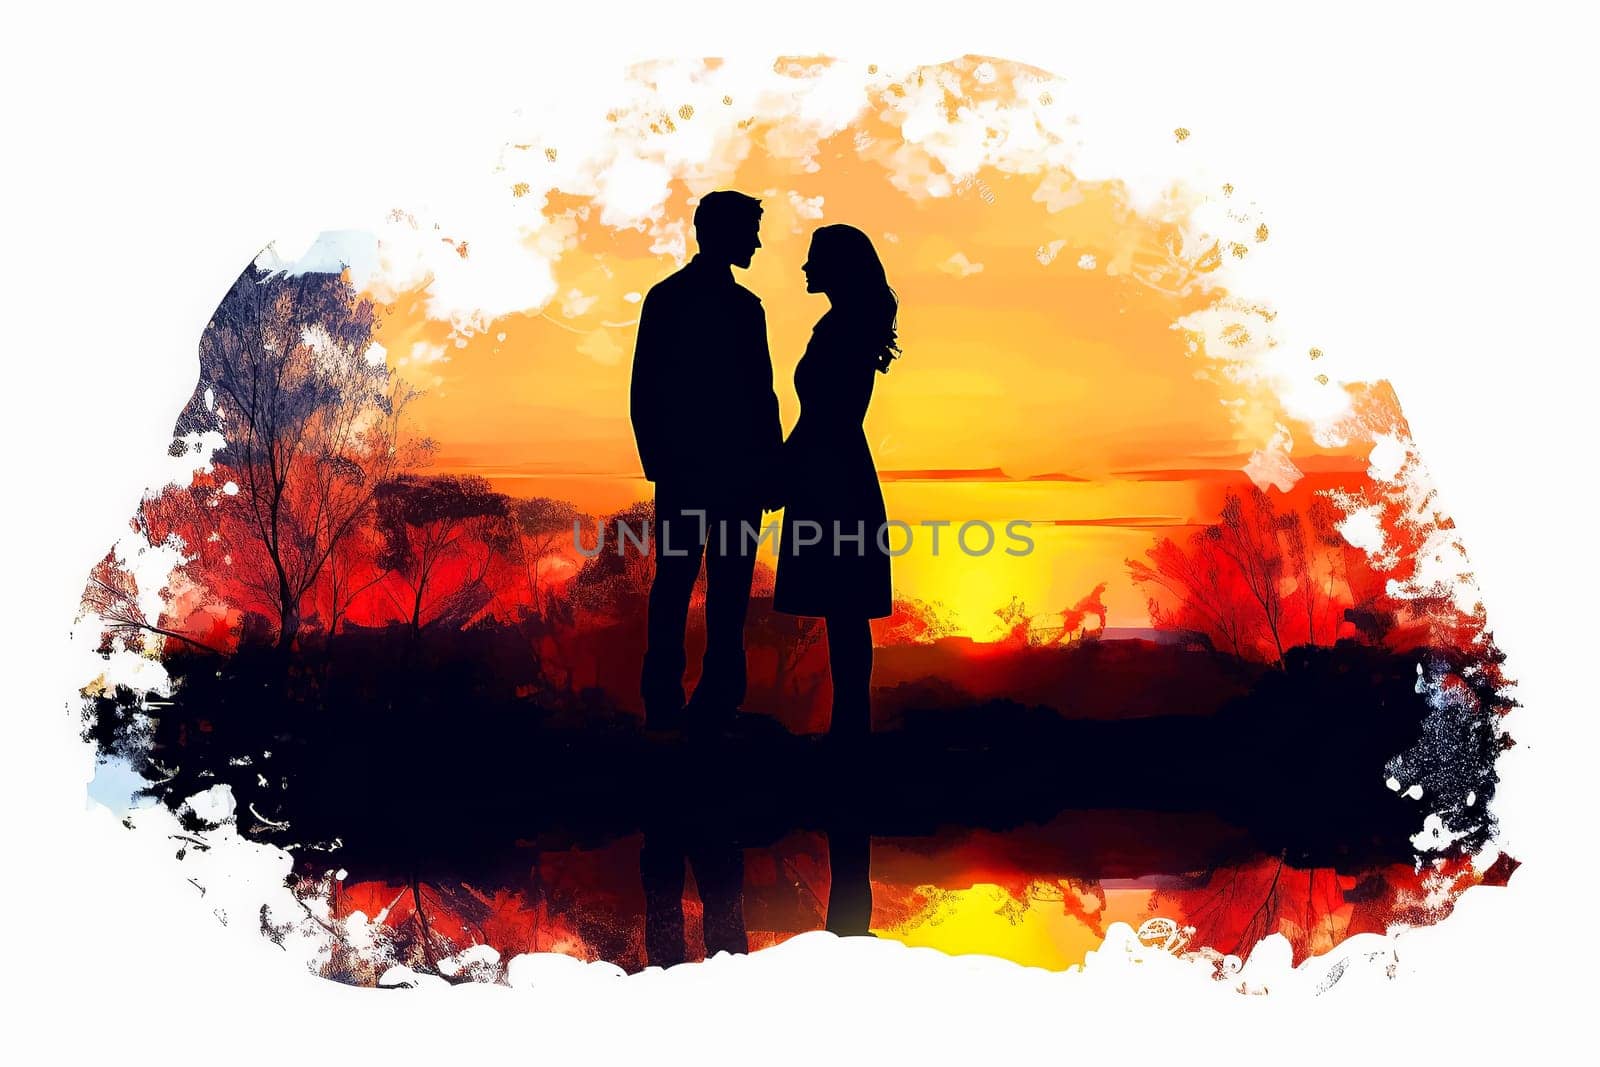 Celebrate loves silhouette with a vibrant watercolor illustration, capturing a couple in a romantic date against a bright background. A vivid expression of togetherness.